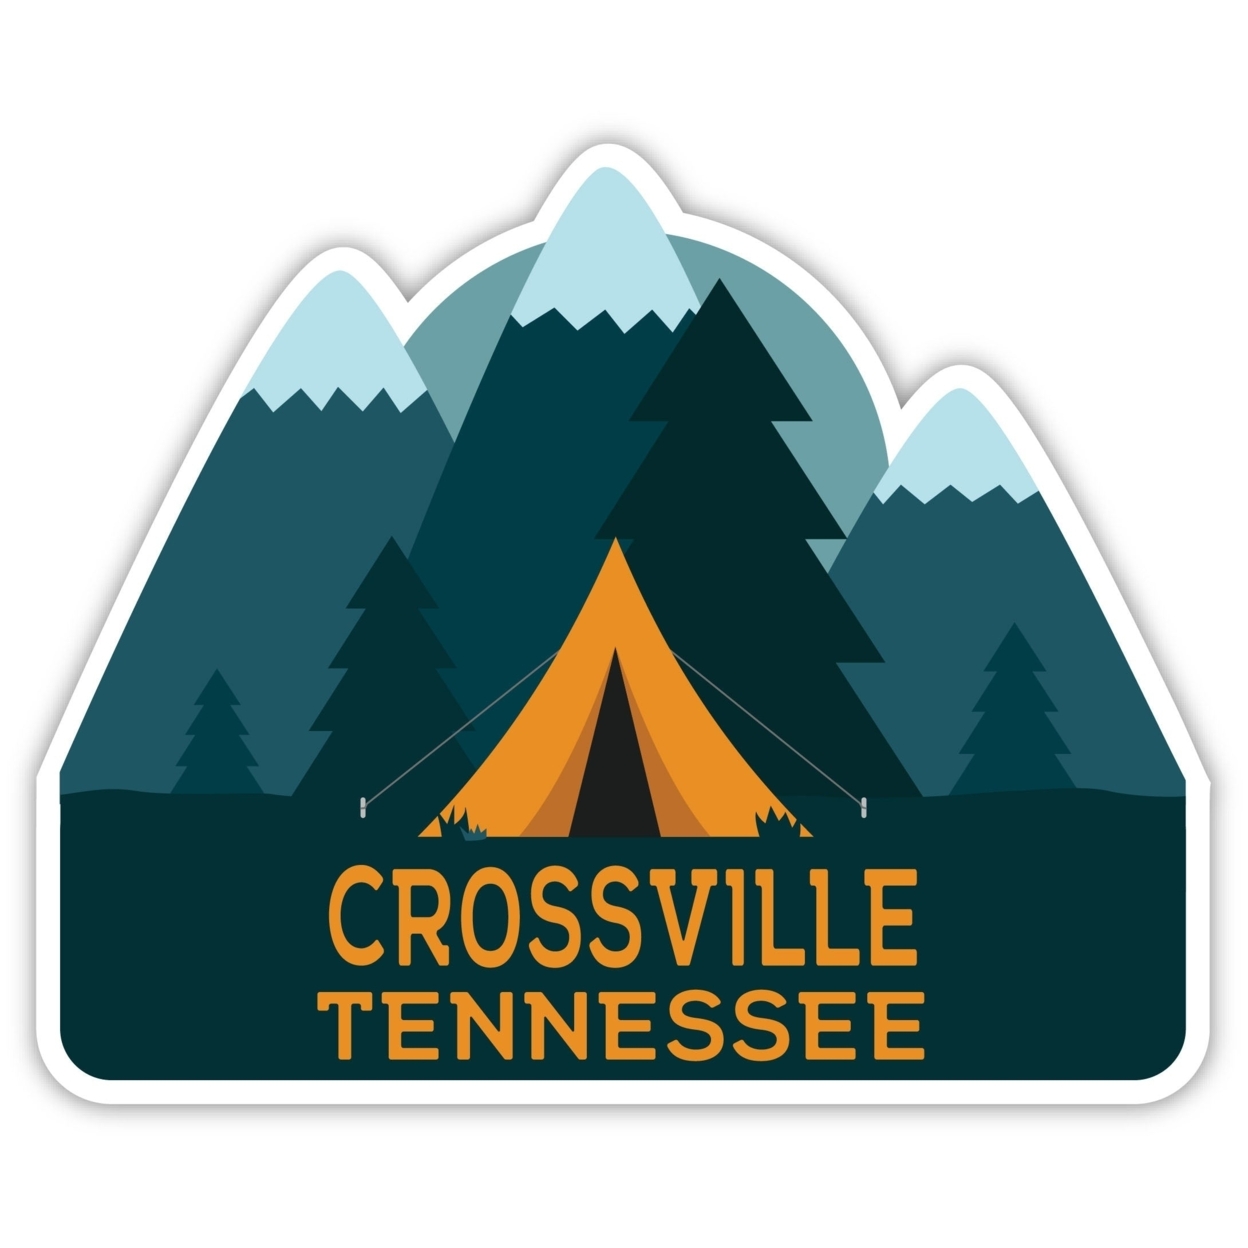 Crossville Tennessee Souvenir Decorative Stickers (Choose Theme And Size) - Single Unit, 2-Inch, Tent